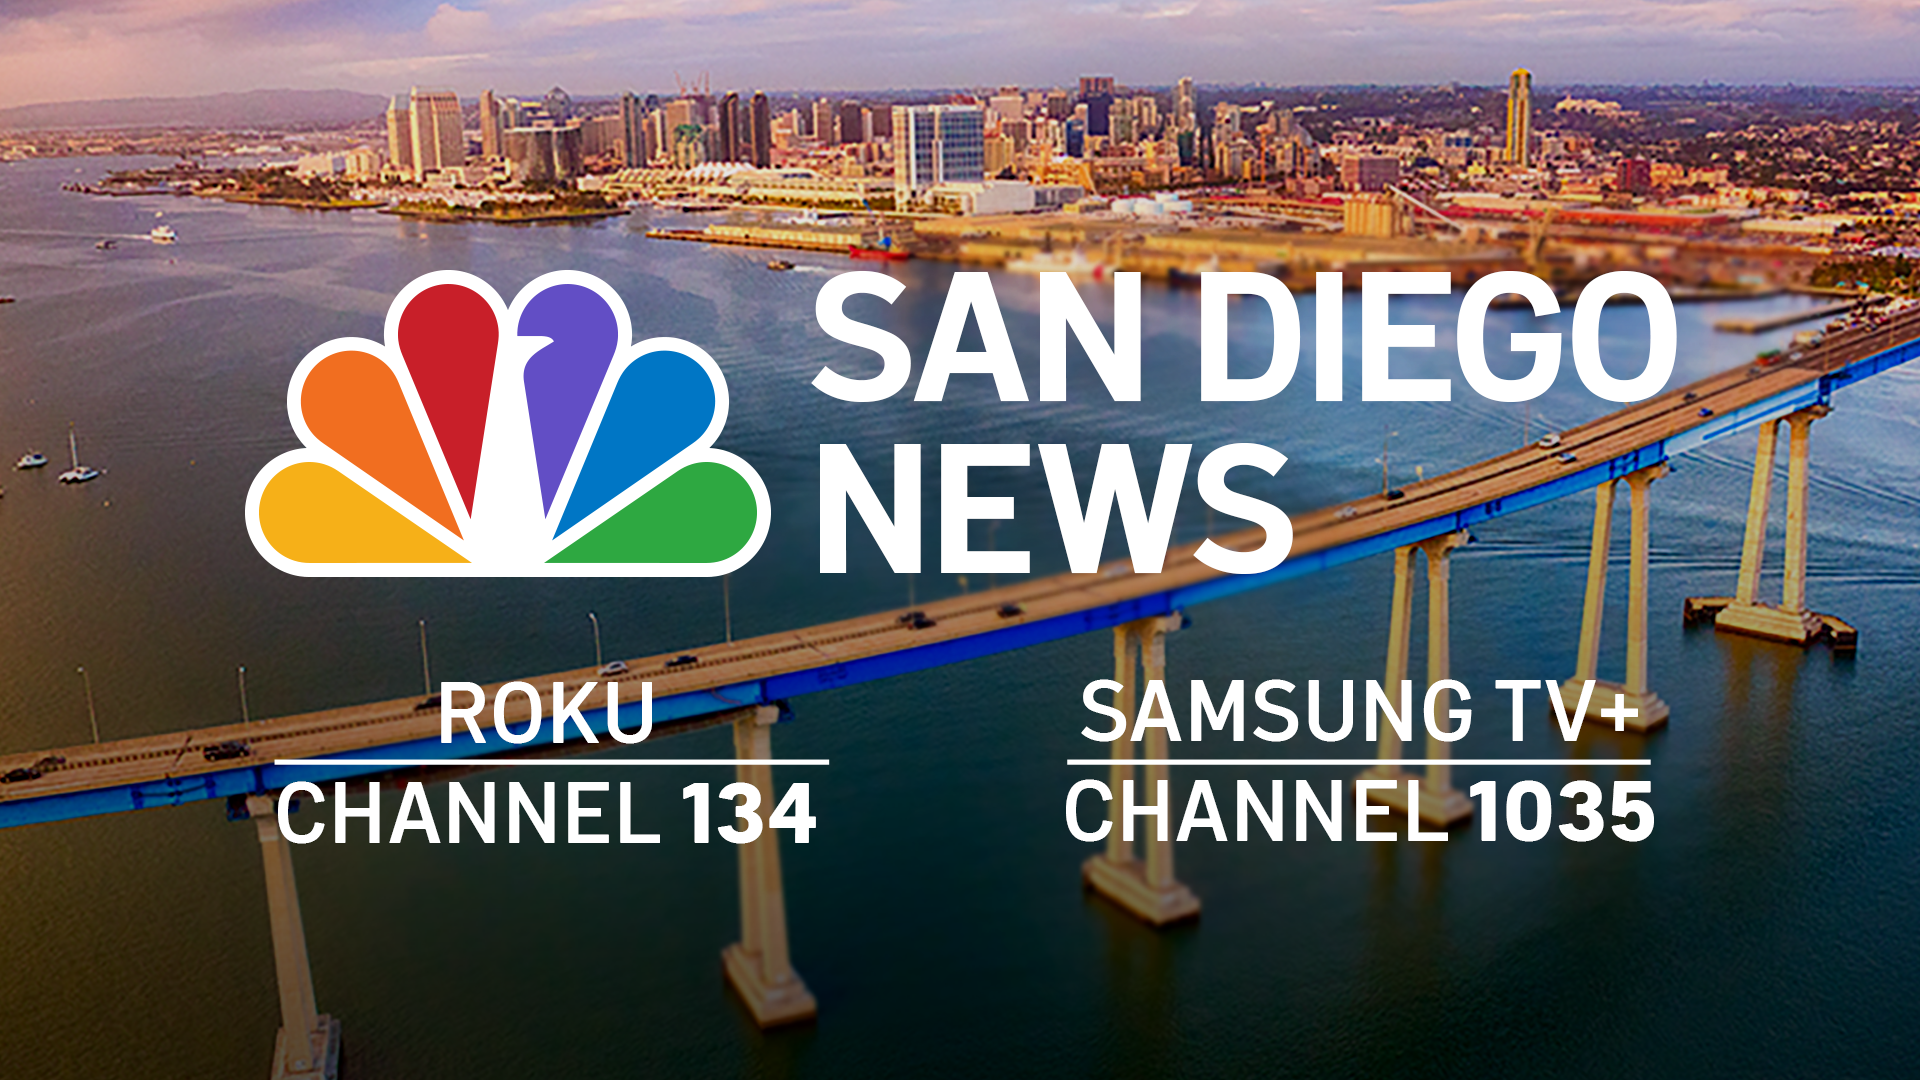 NBC 7 can be seen on Roku channel 134 & Samsung TV+ Channel 1035. Or swipe to watch in app.